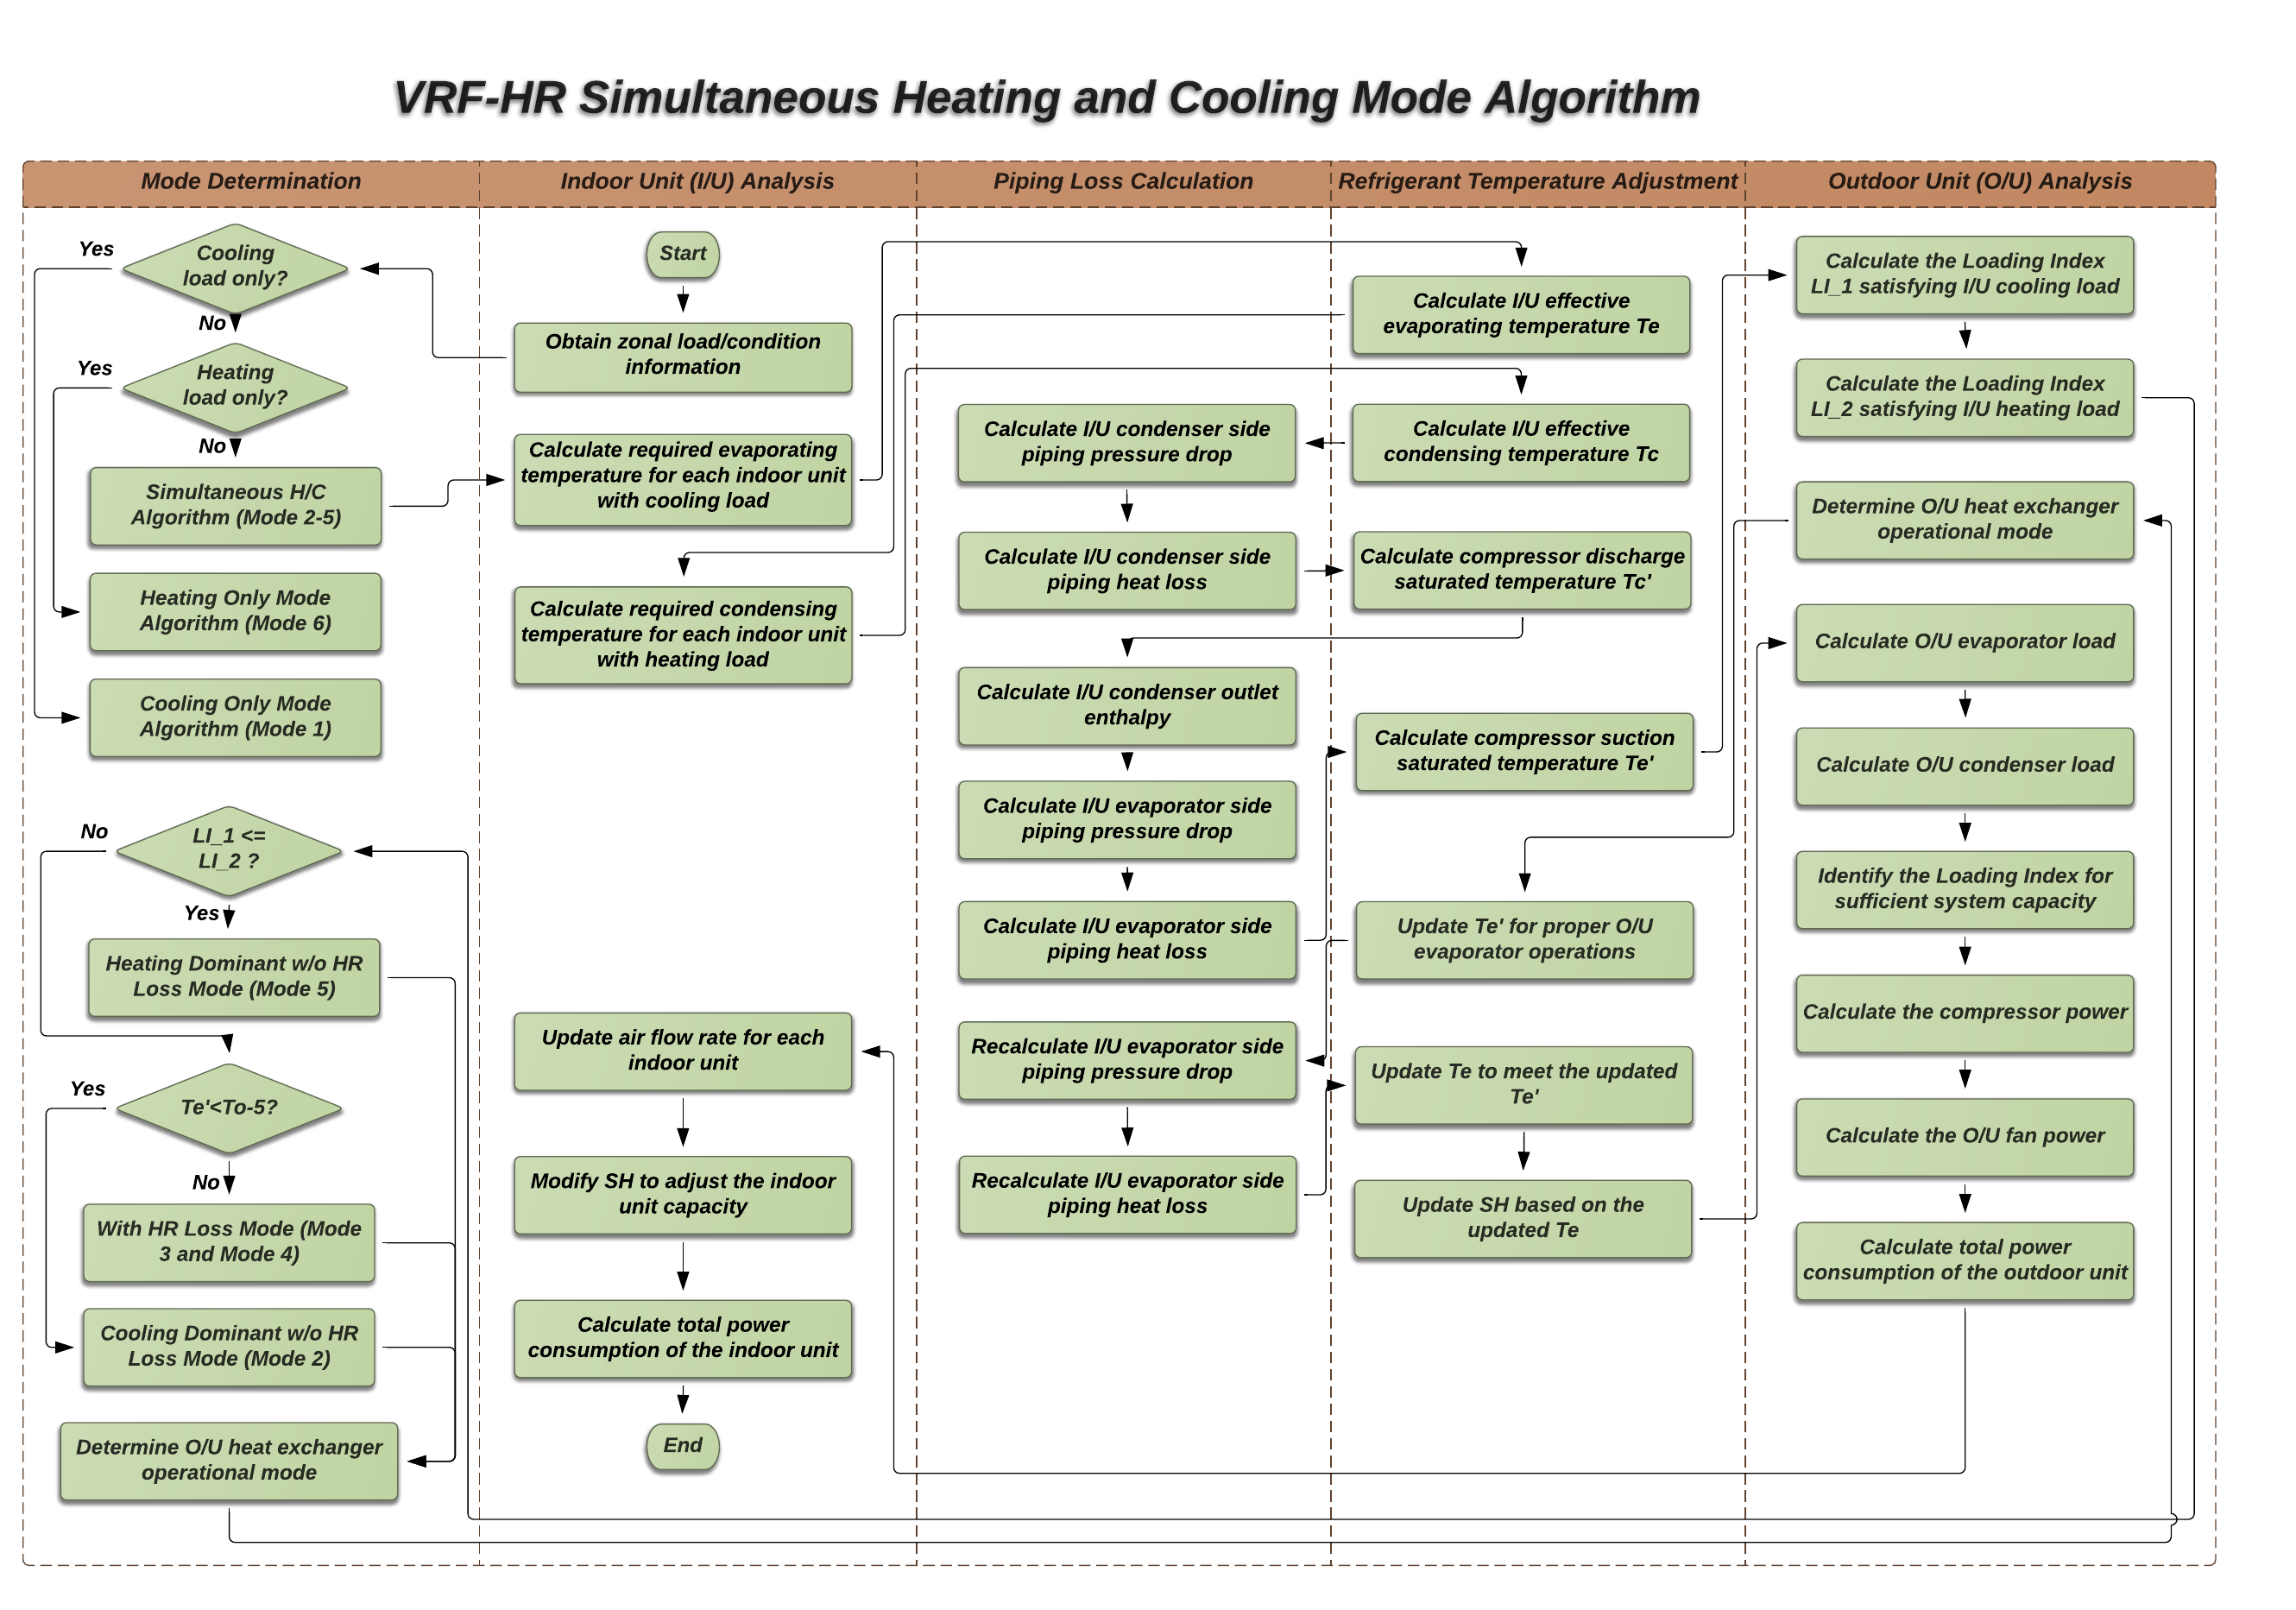 Schematic chart of the new VRF-HR algorithm: Simultaneous Heating and Cooling Mode